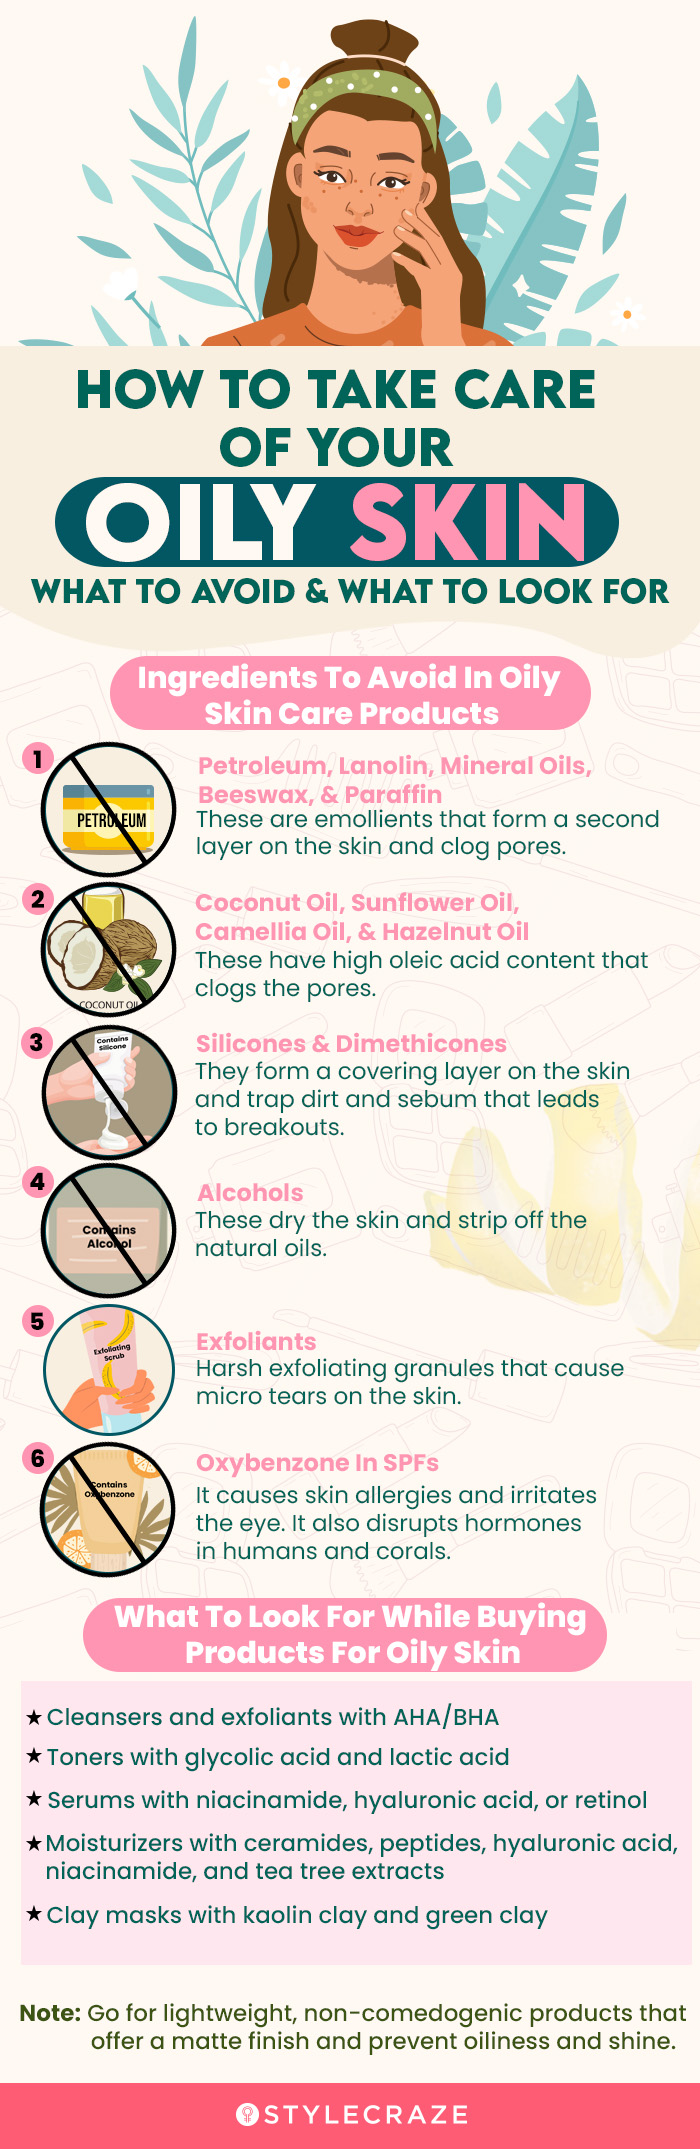 How To Take Care Of Your Oily Skin (infographic)